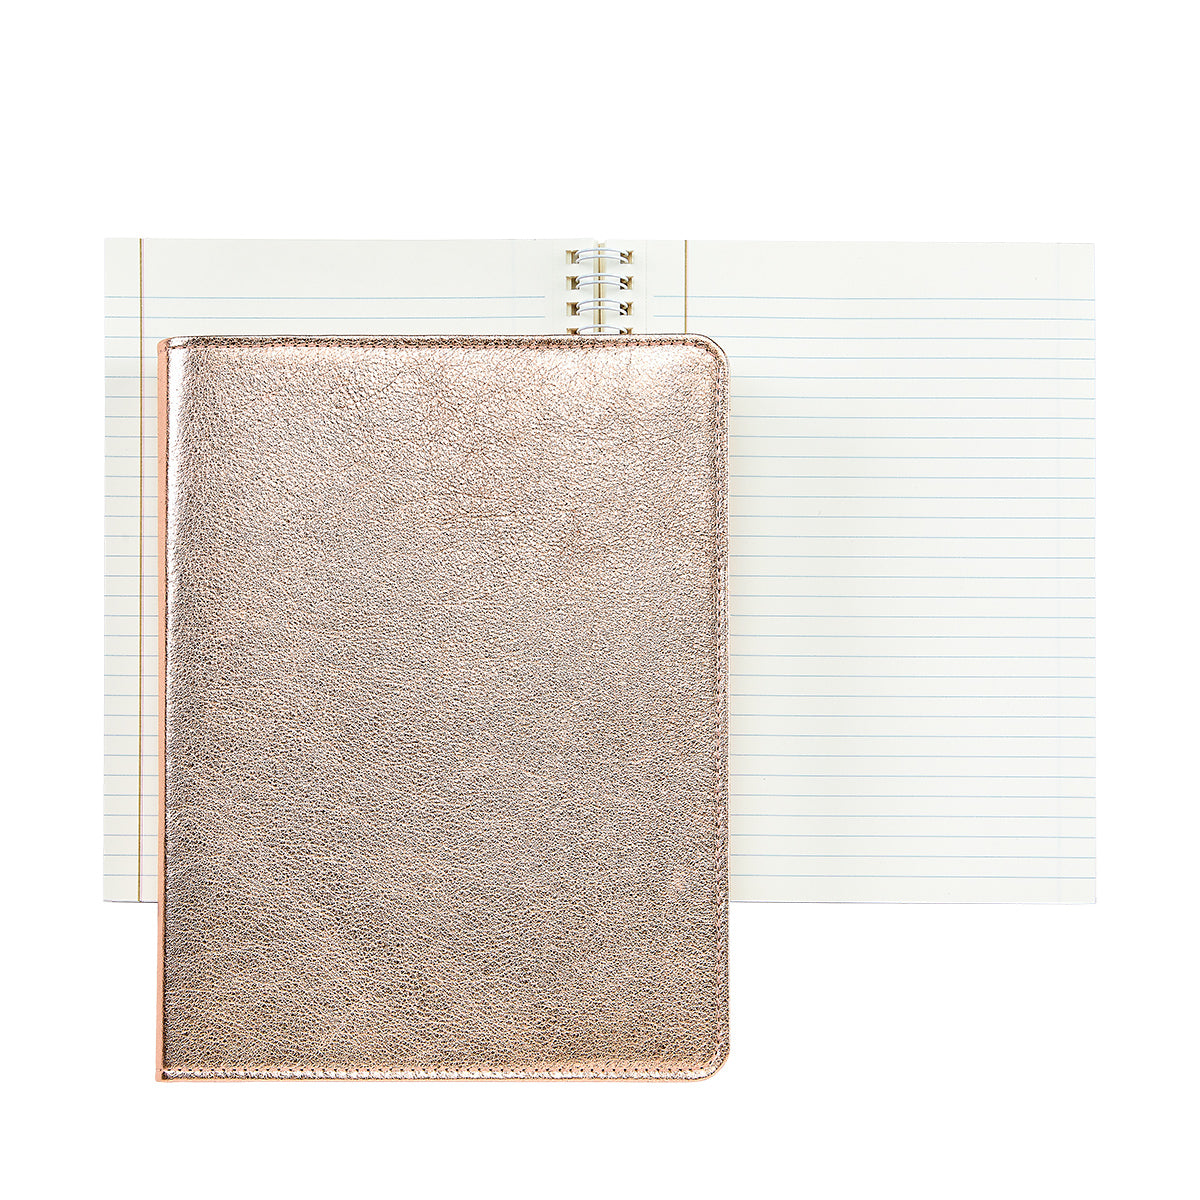 Graphic Image 9 Wire-O-Notebook Rose Gold Metallic Goatskin Leather